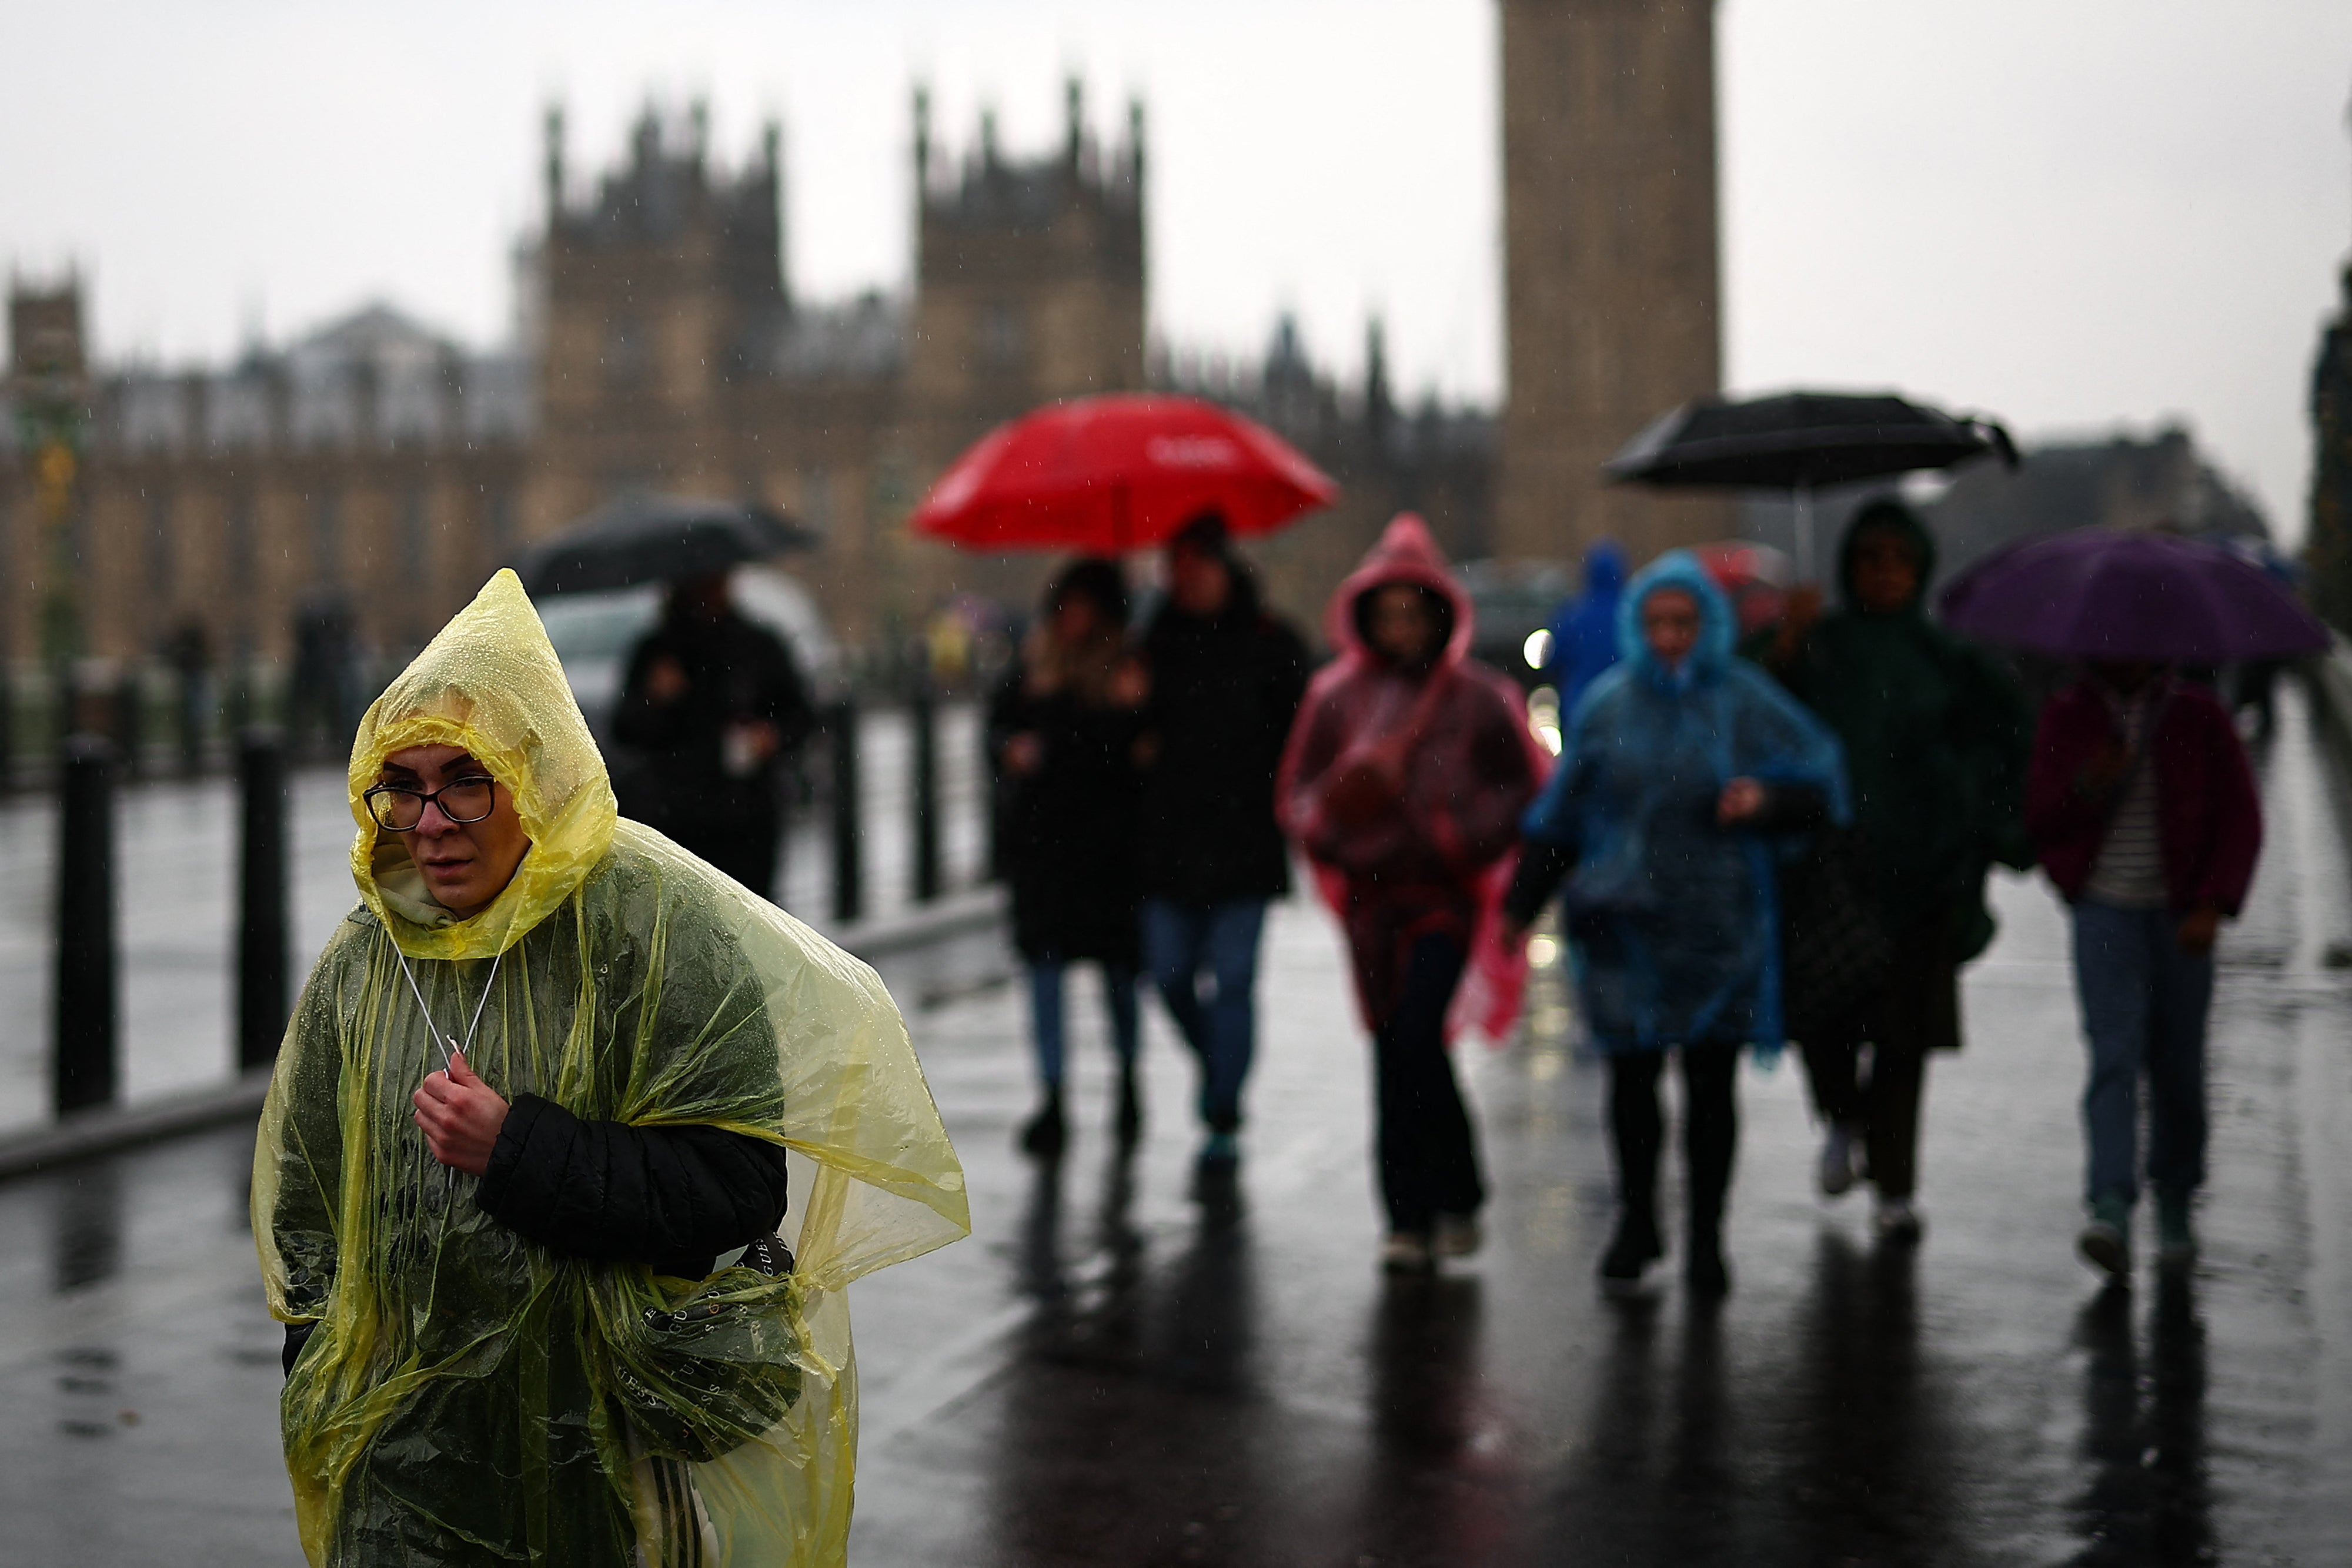 Tourists shelter from the rain as they walk over Westminster Bridge, with the Houses of Parliament in the background, in London on March 10, 2024. (Photo by HENRY NICHOLLS / AFP) (Photo by HENRY NICHOLLS/AFP via Getty Images)